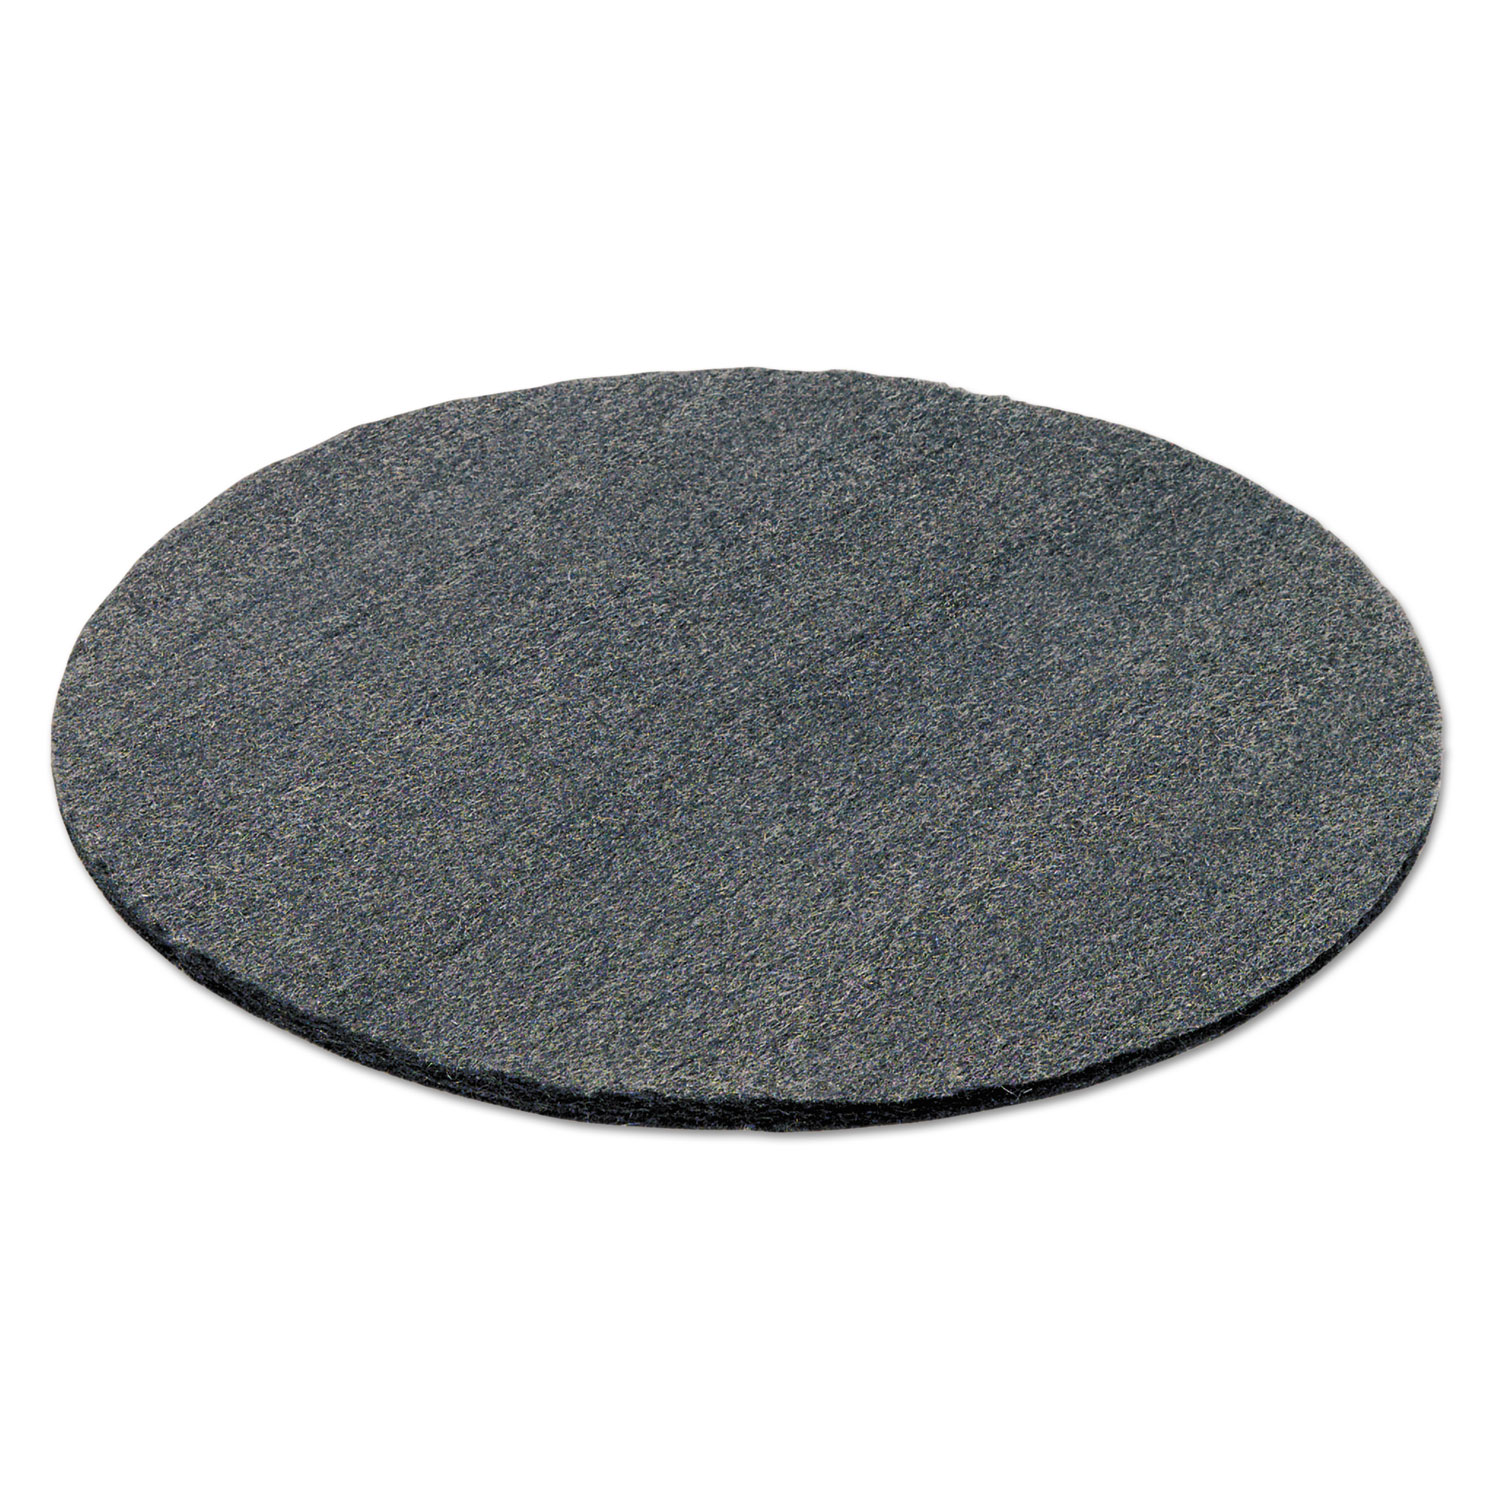  GMT 120190 Radial Steel Wool Pads, Grade 0 (fine): Cleaning & Polishing, 19, Gray, 12/CT (GMA120190) 